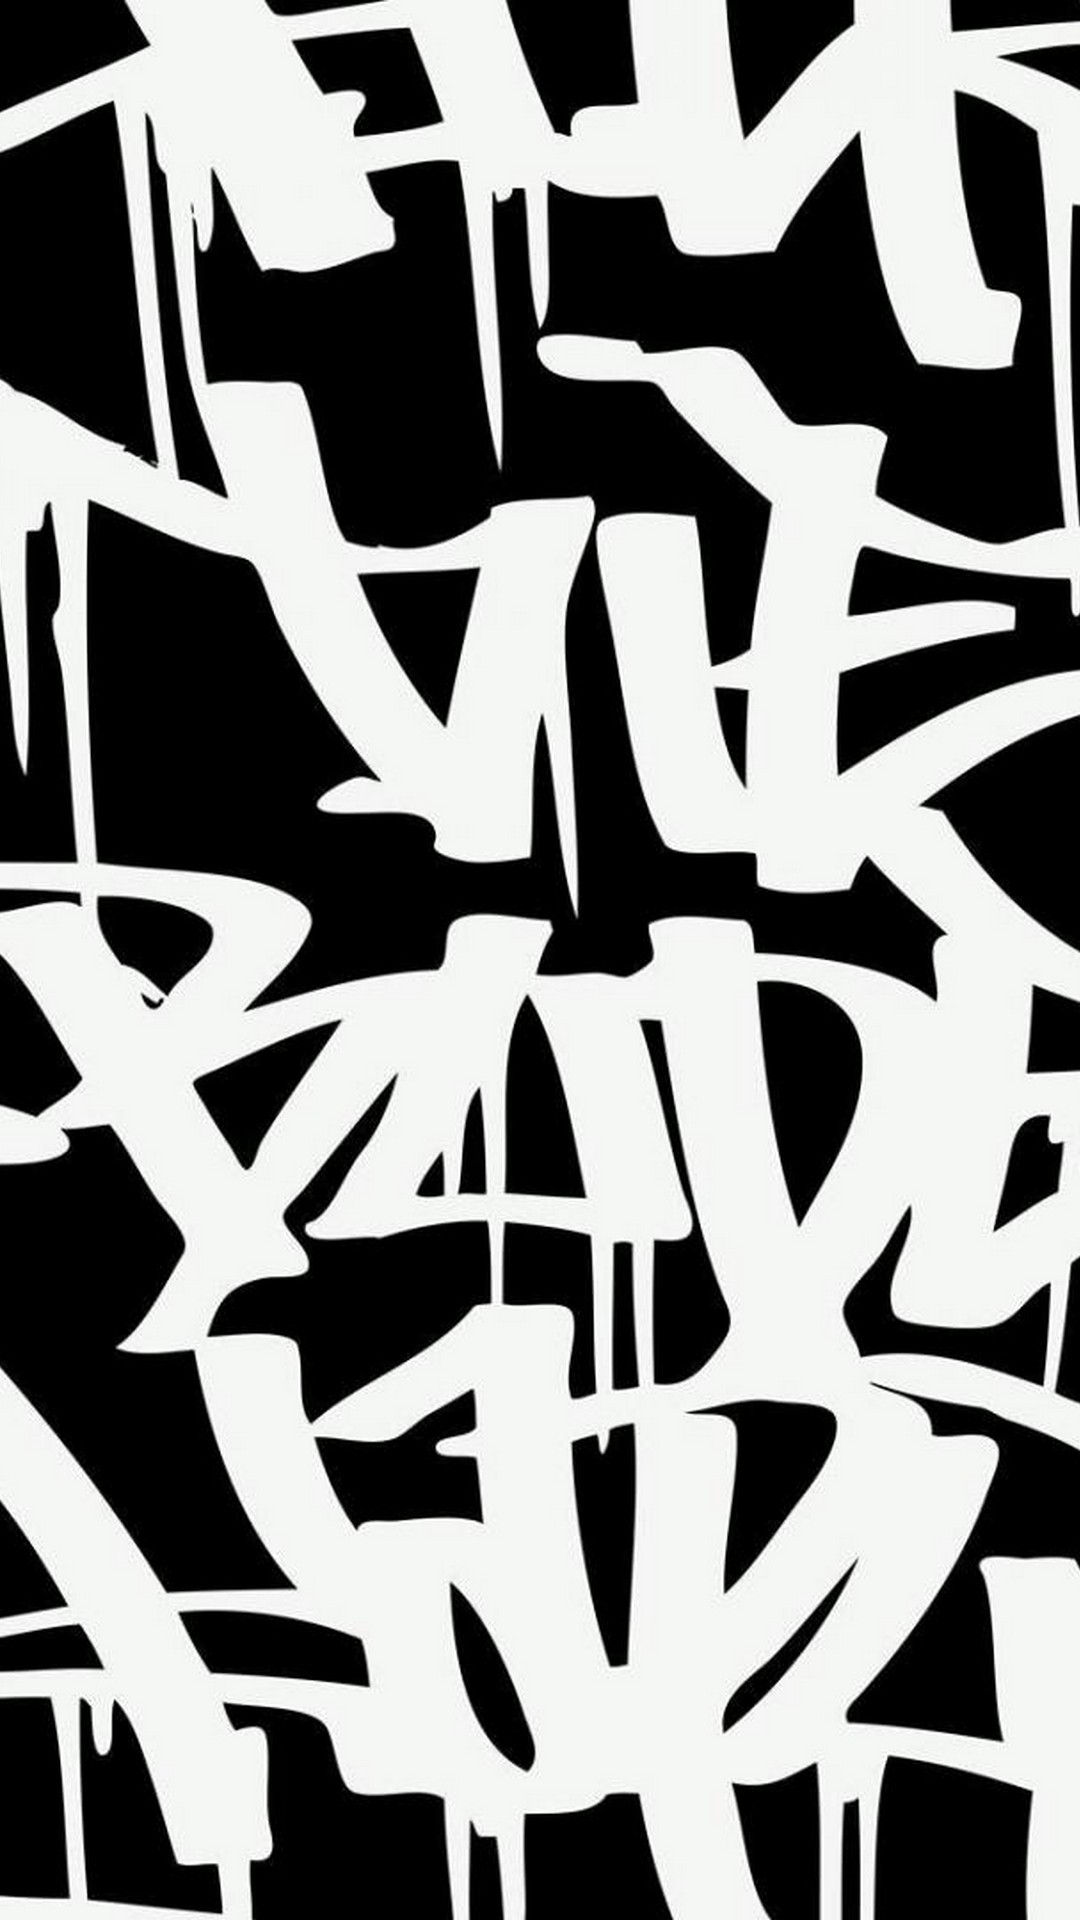 Wallpaper Graffiti Letters iPhone with image resolution 1080x1920 pixel. You can make this wallpaper for your iPhone 5, 6, 7, 8, X backgrounds, Mobile Screensaver, or iPad Lock Screen